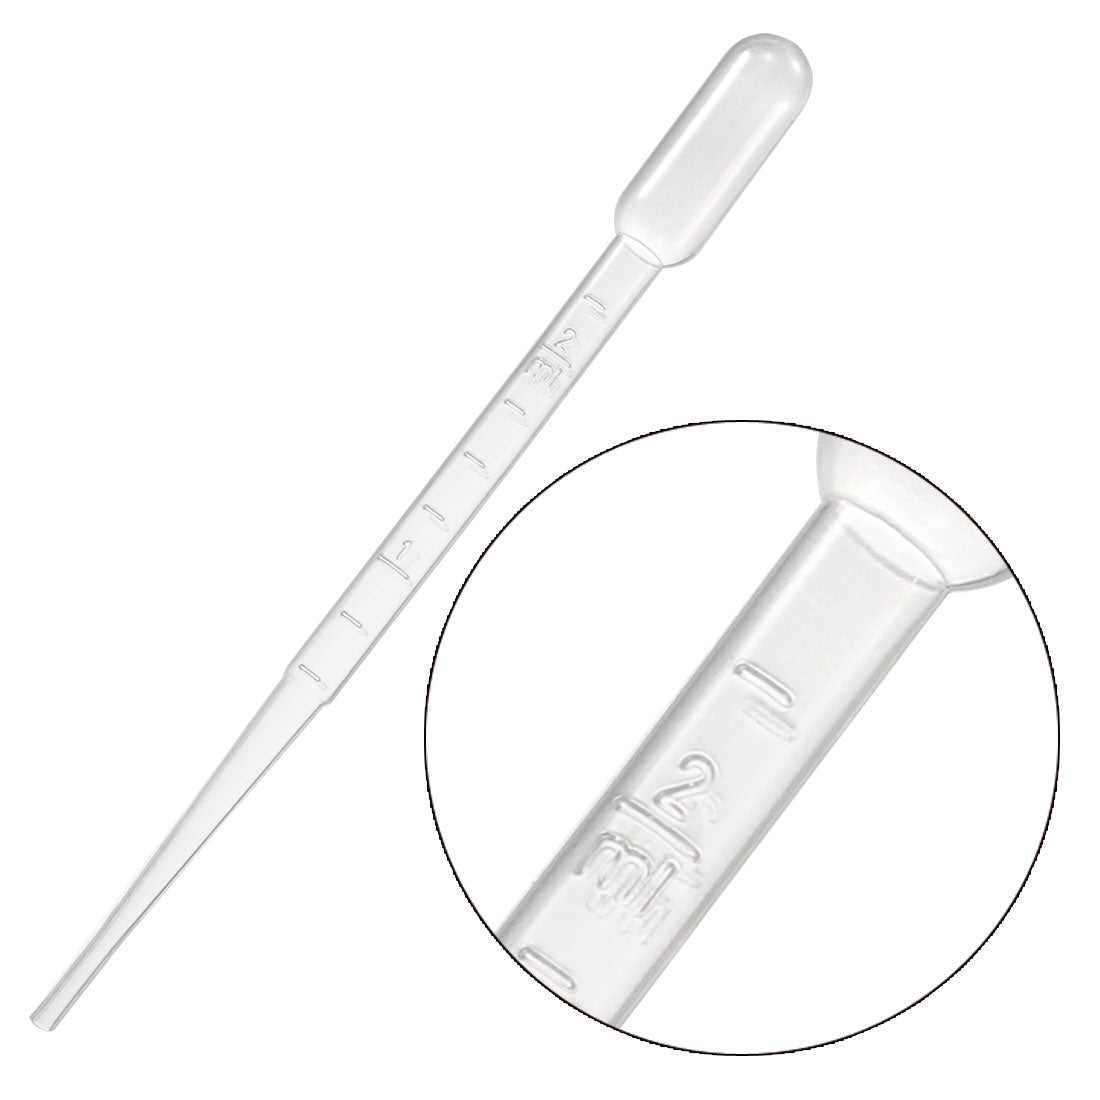 uxcell Uxcell 20 Pcs 2ml Disposable Pasteur Pipettes Test Tubes Liquid Drop Droppers Graduated 146mm Long